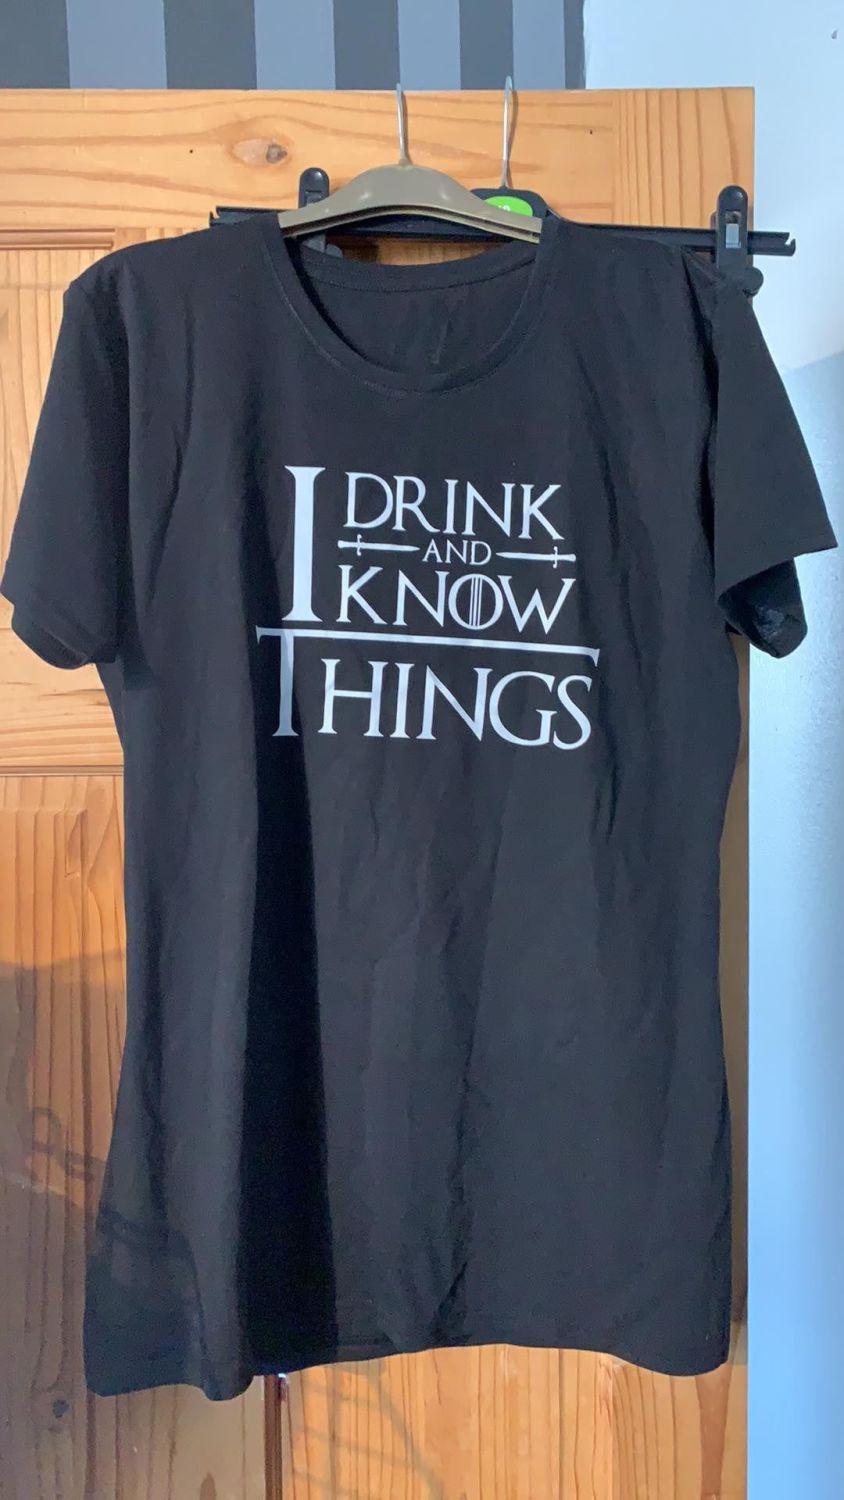 B3 DRINK AND KNOW TEE SIZE 12 £8